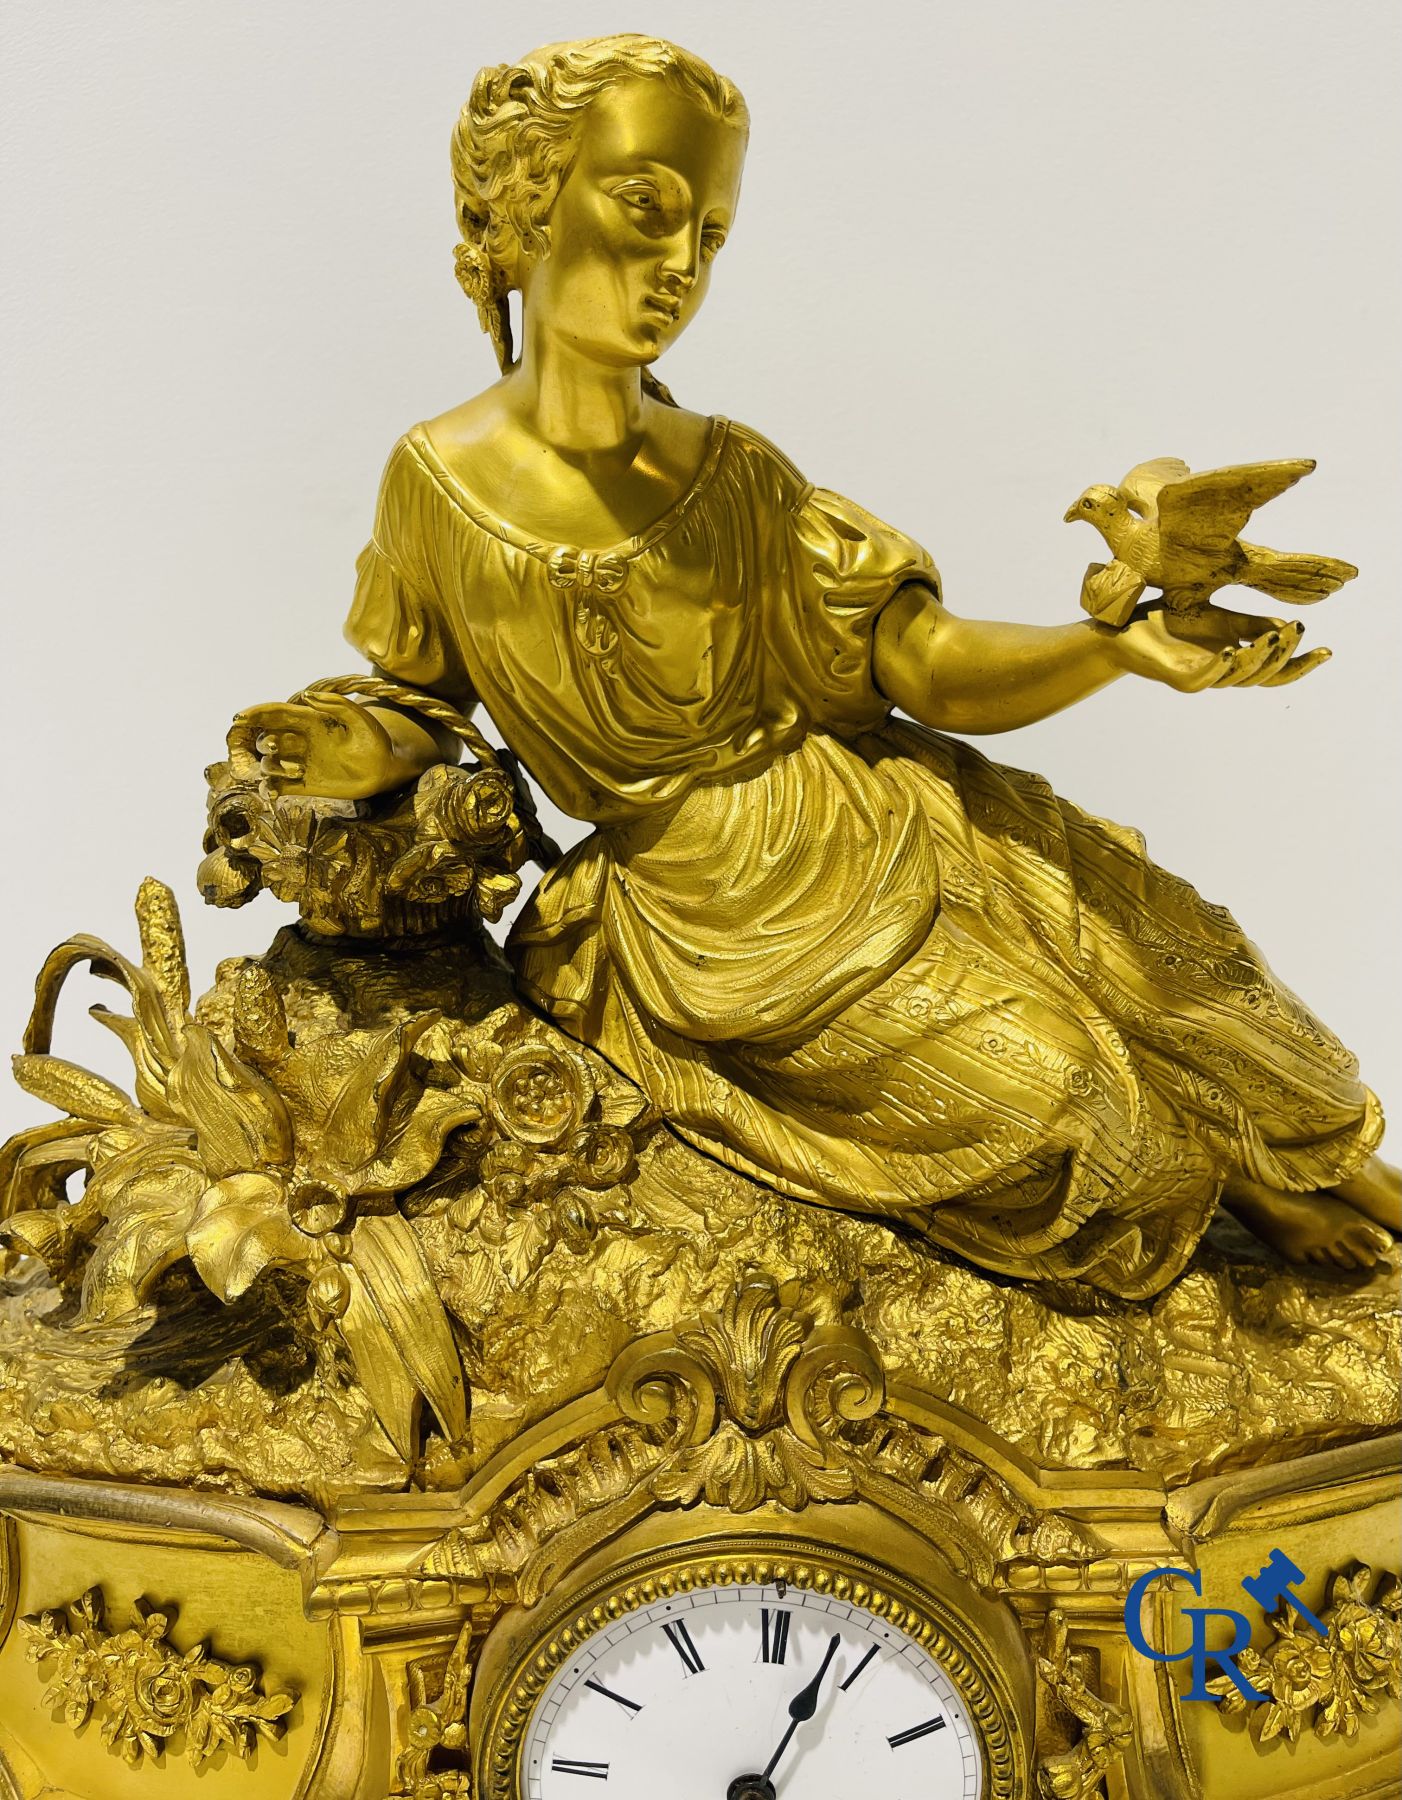 Bronze gilded clock with a romantic performance. 19th century. - Image 2 of 9